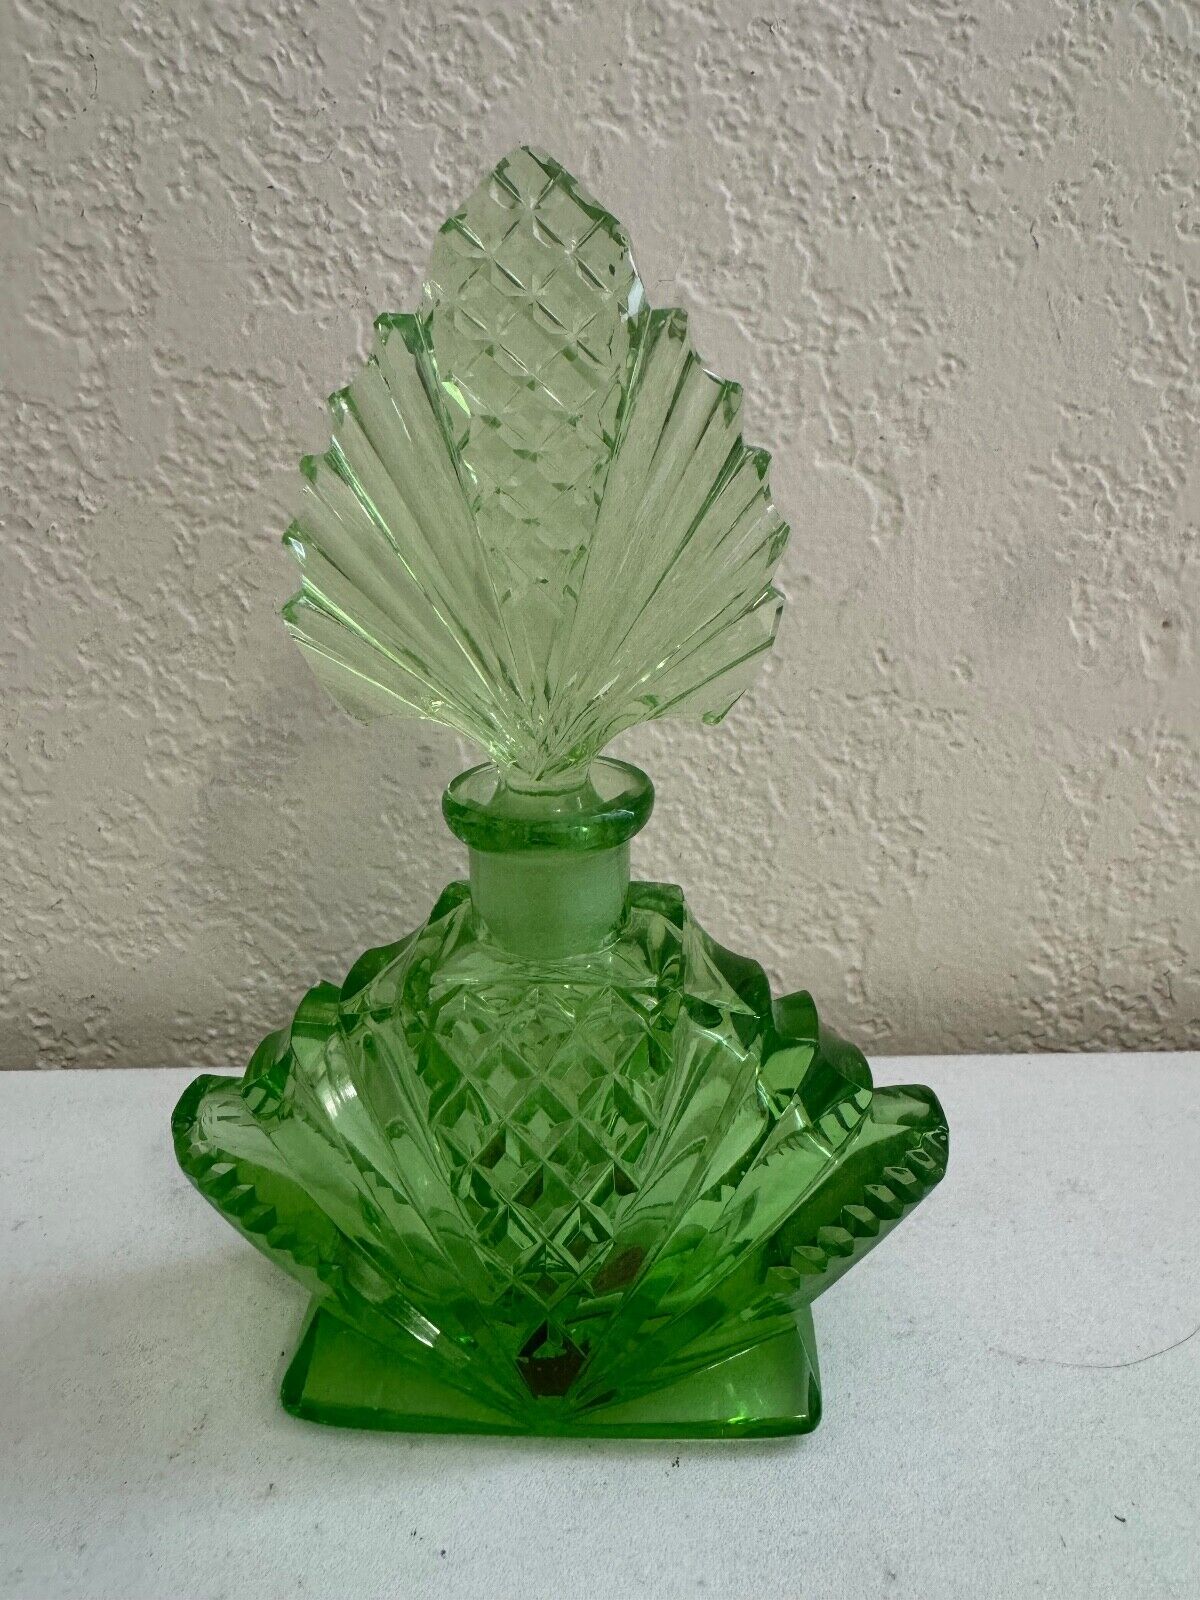 Vintage Likely Czech Glass or Crystal Green Perfume Bottle